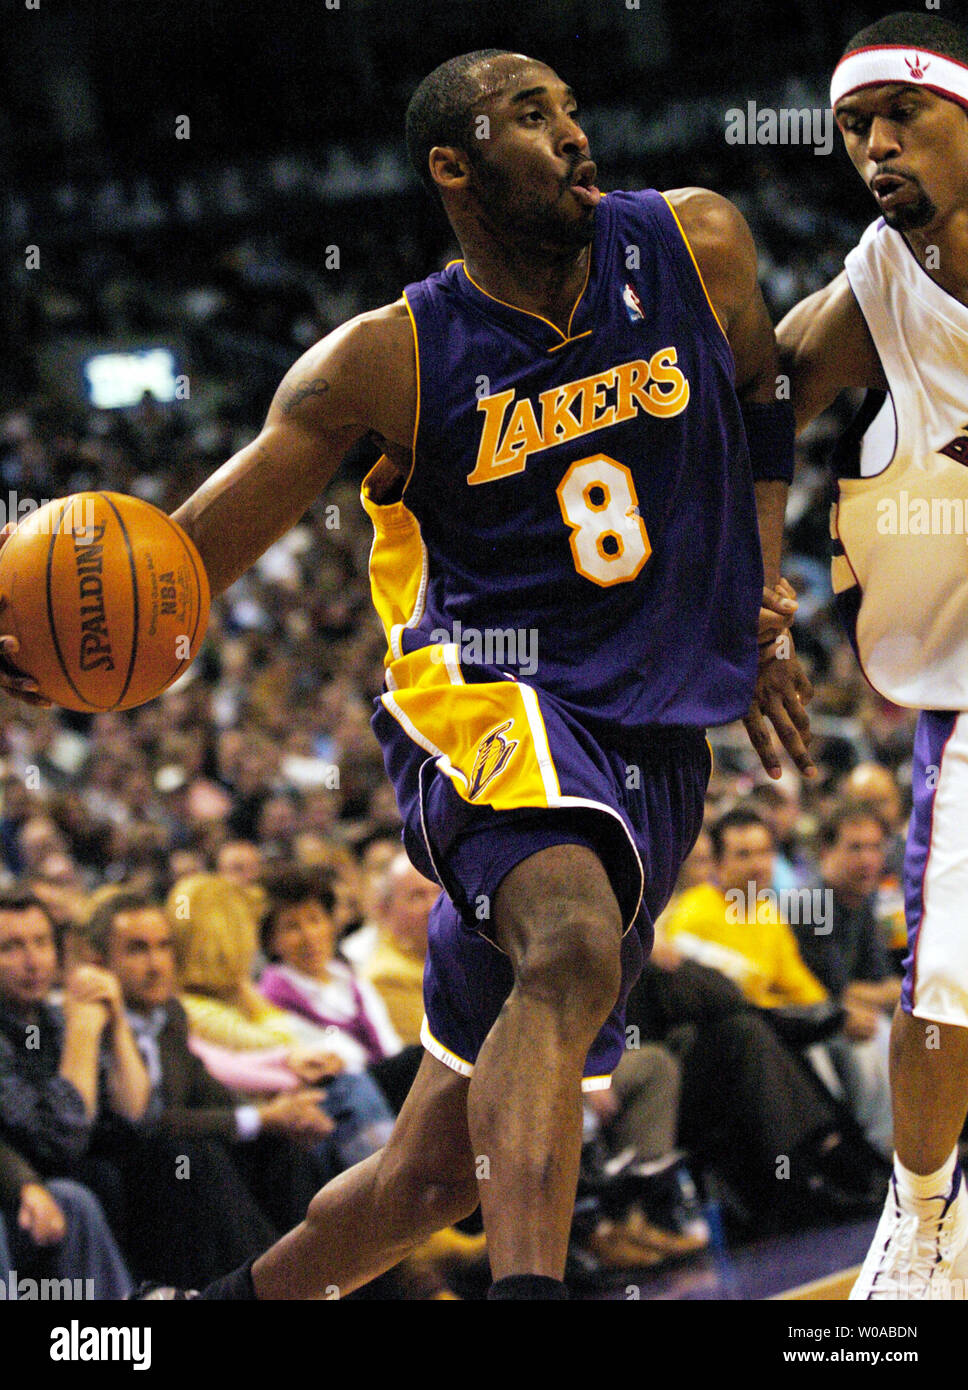 Los Angeles Lakers' Kobe Bryant drives the ball into the paint by Toronto Raptors' Jalen Rose during third quarter action at the Air Canada Center February 27, 2005 in Toronto, Canada. Bryant led all scorers with 31 points but the Raptors went on to defeat the Lakers 108-102. (UPI Photo/Christine Chew) Stock Photo